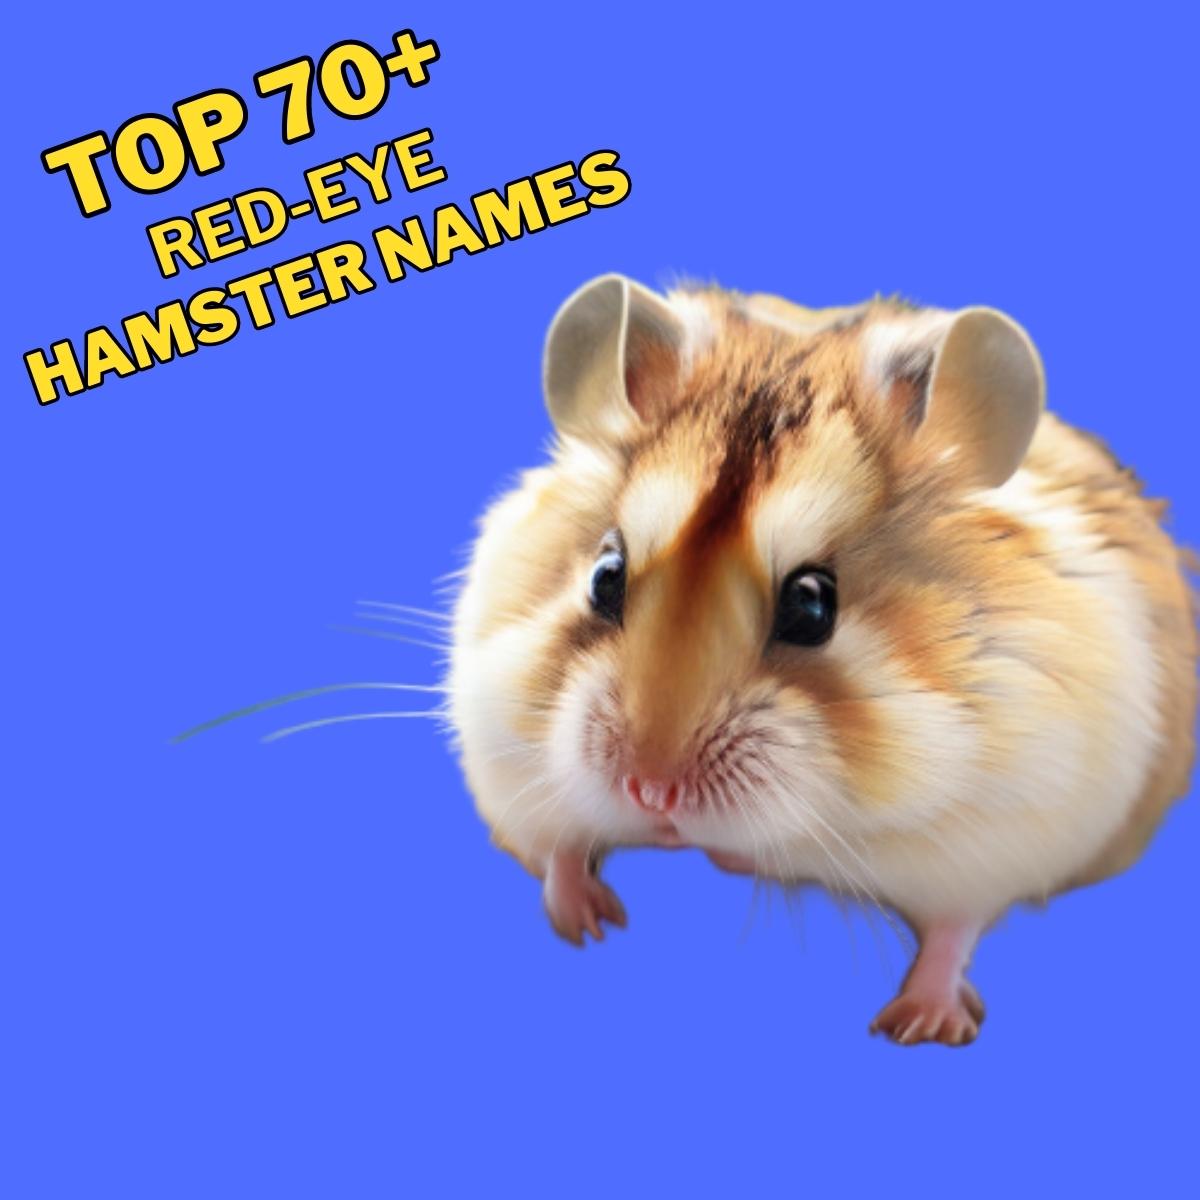 Red Eye Hamster Names With Meaning Our Top 70 Picks